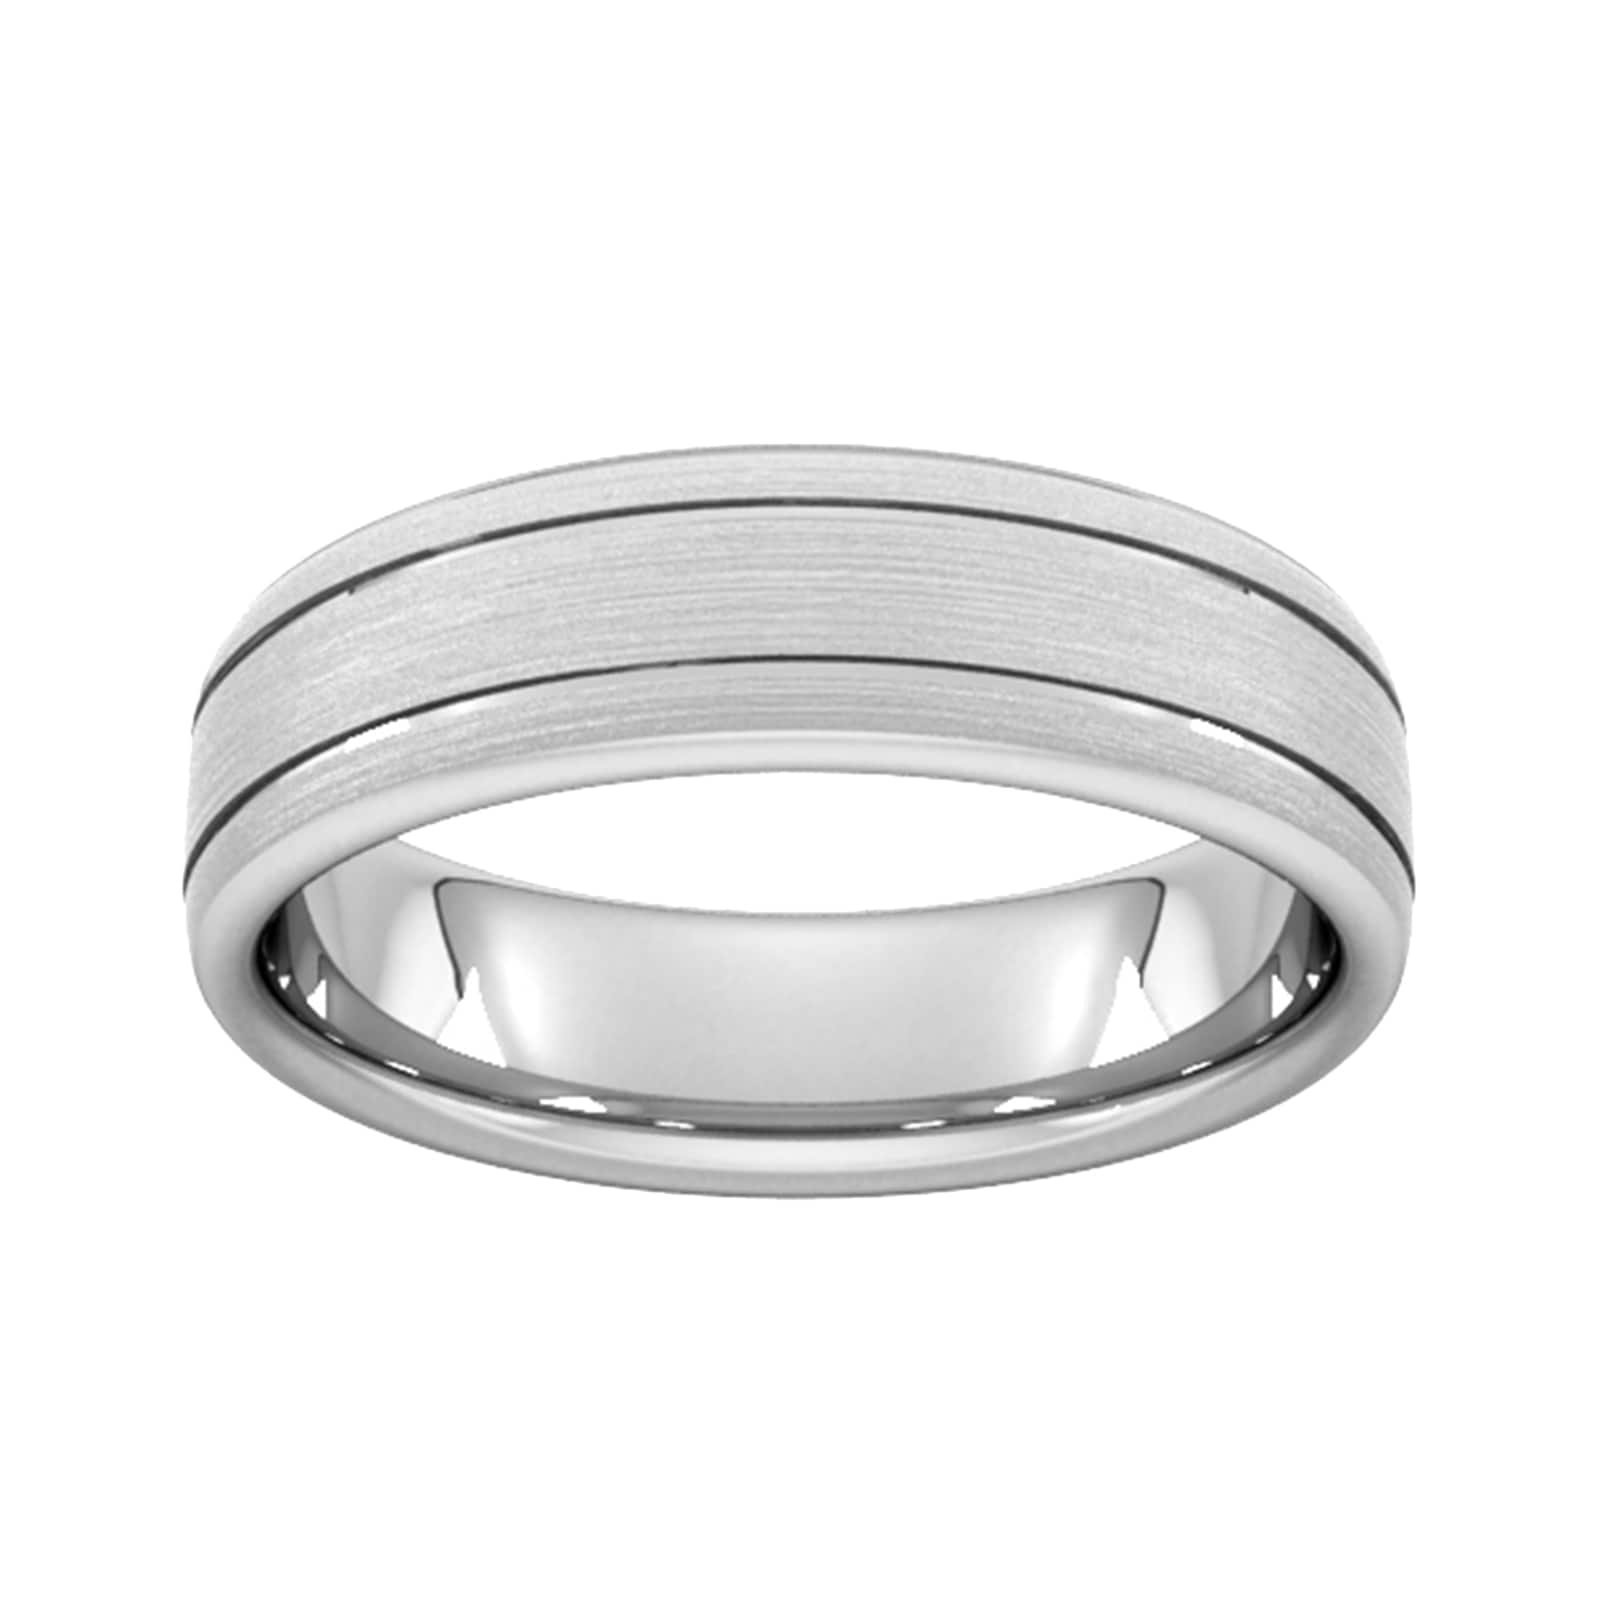 6mm Slight Court Heavy Matt Finish With Double Grooves Wedding Ring In 9 Carat White Gold - Ring Size H